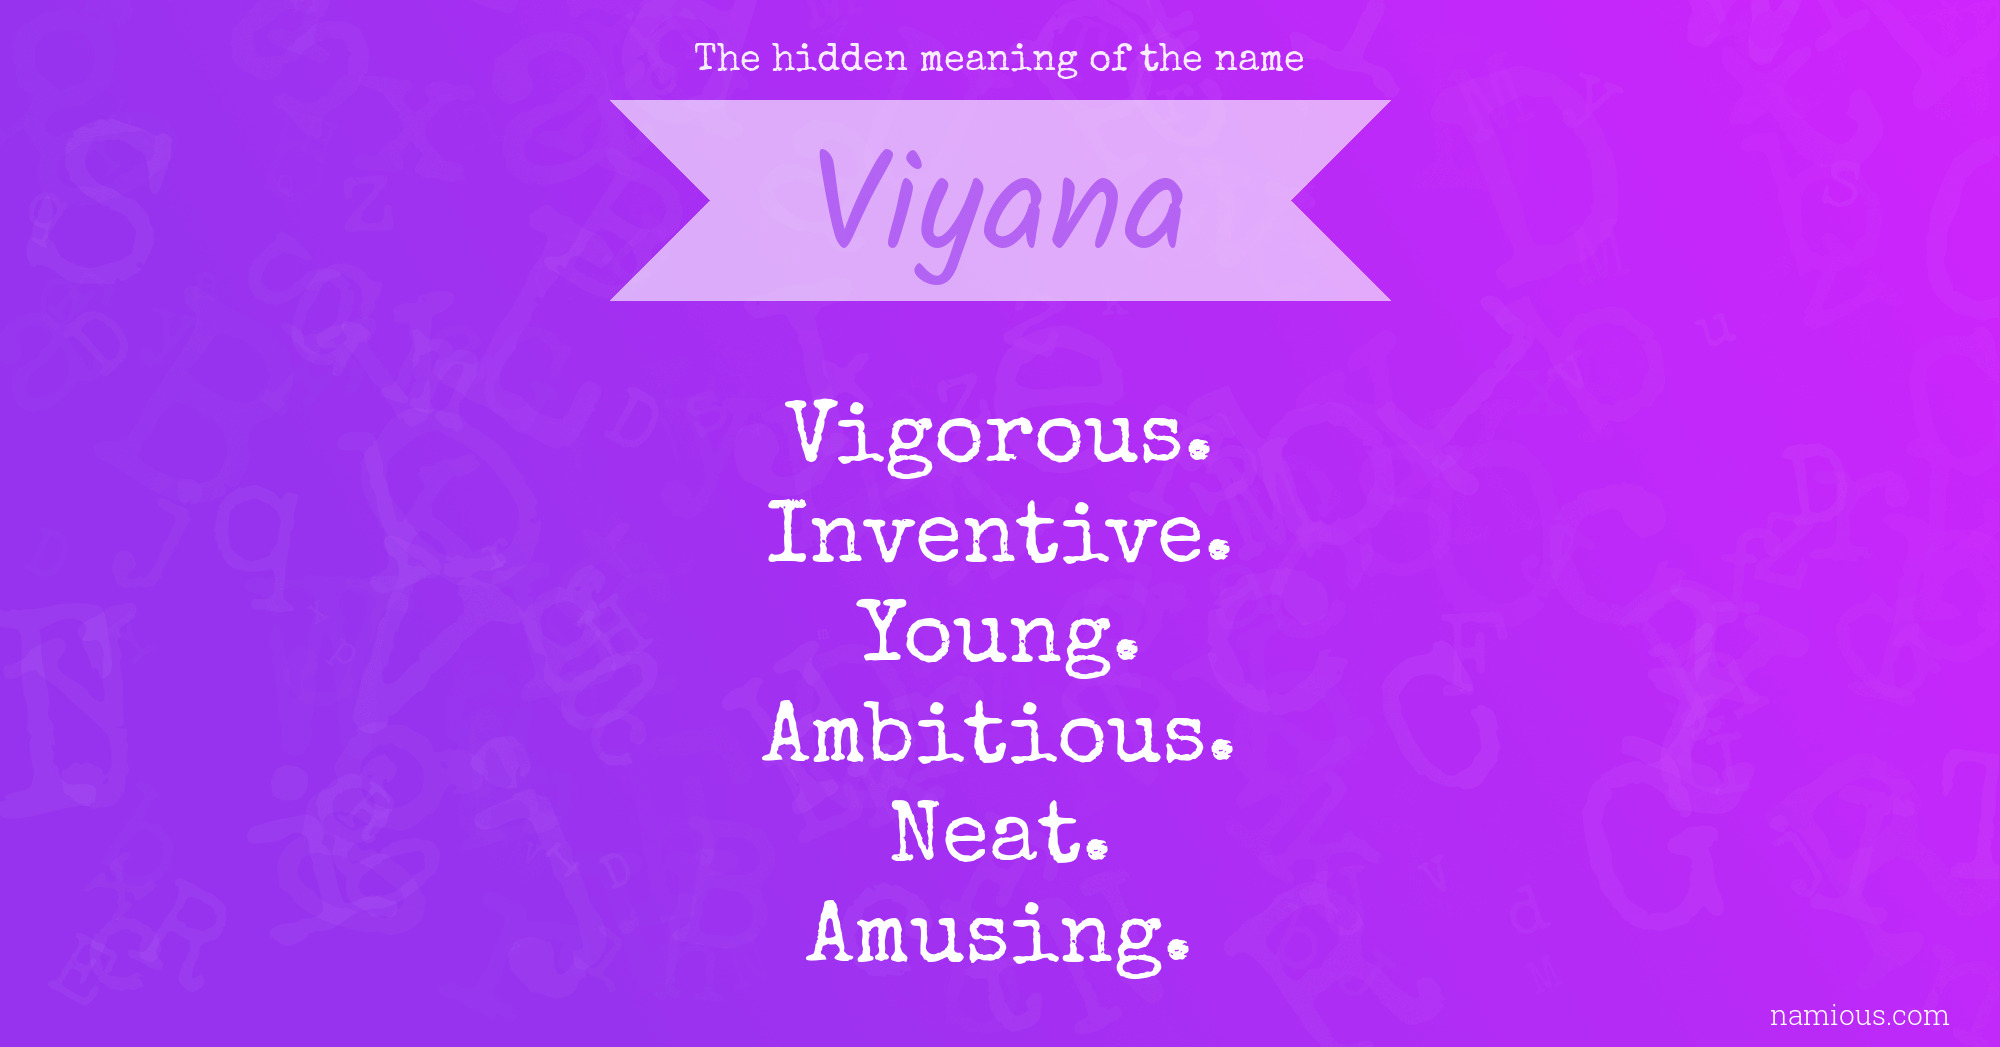 The hidden meaning of the name Viyana